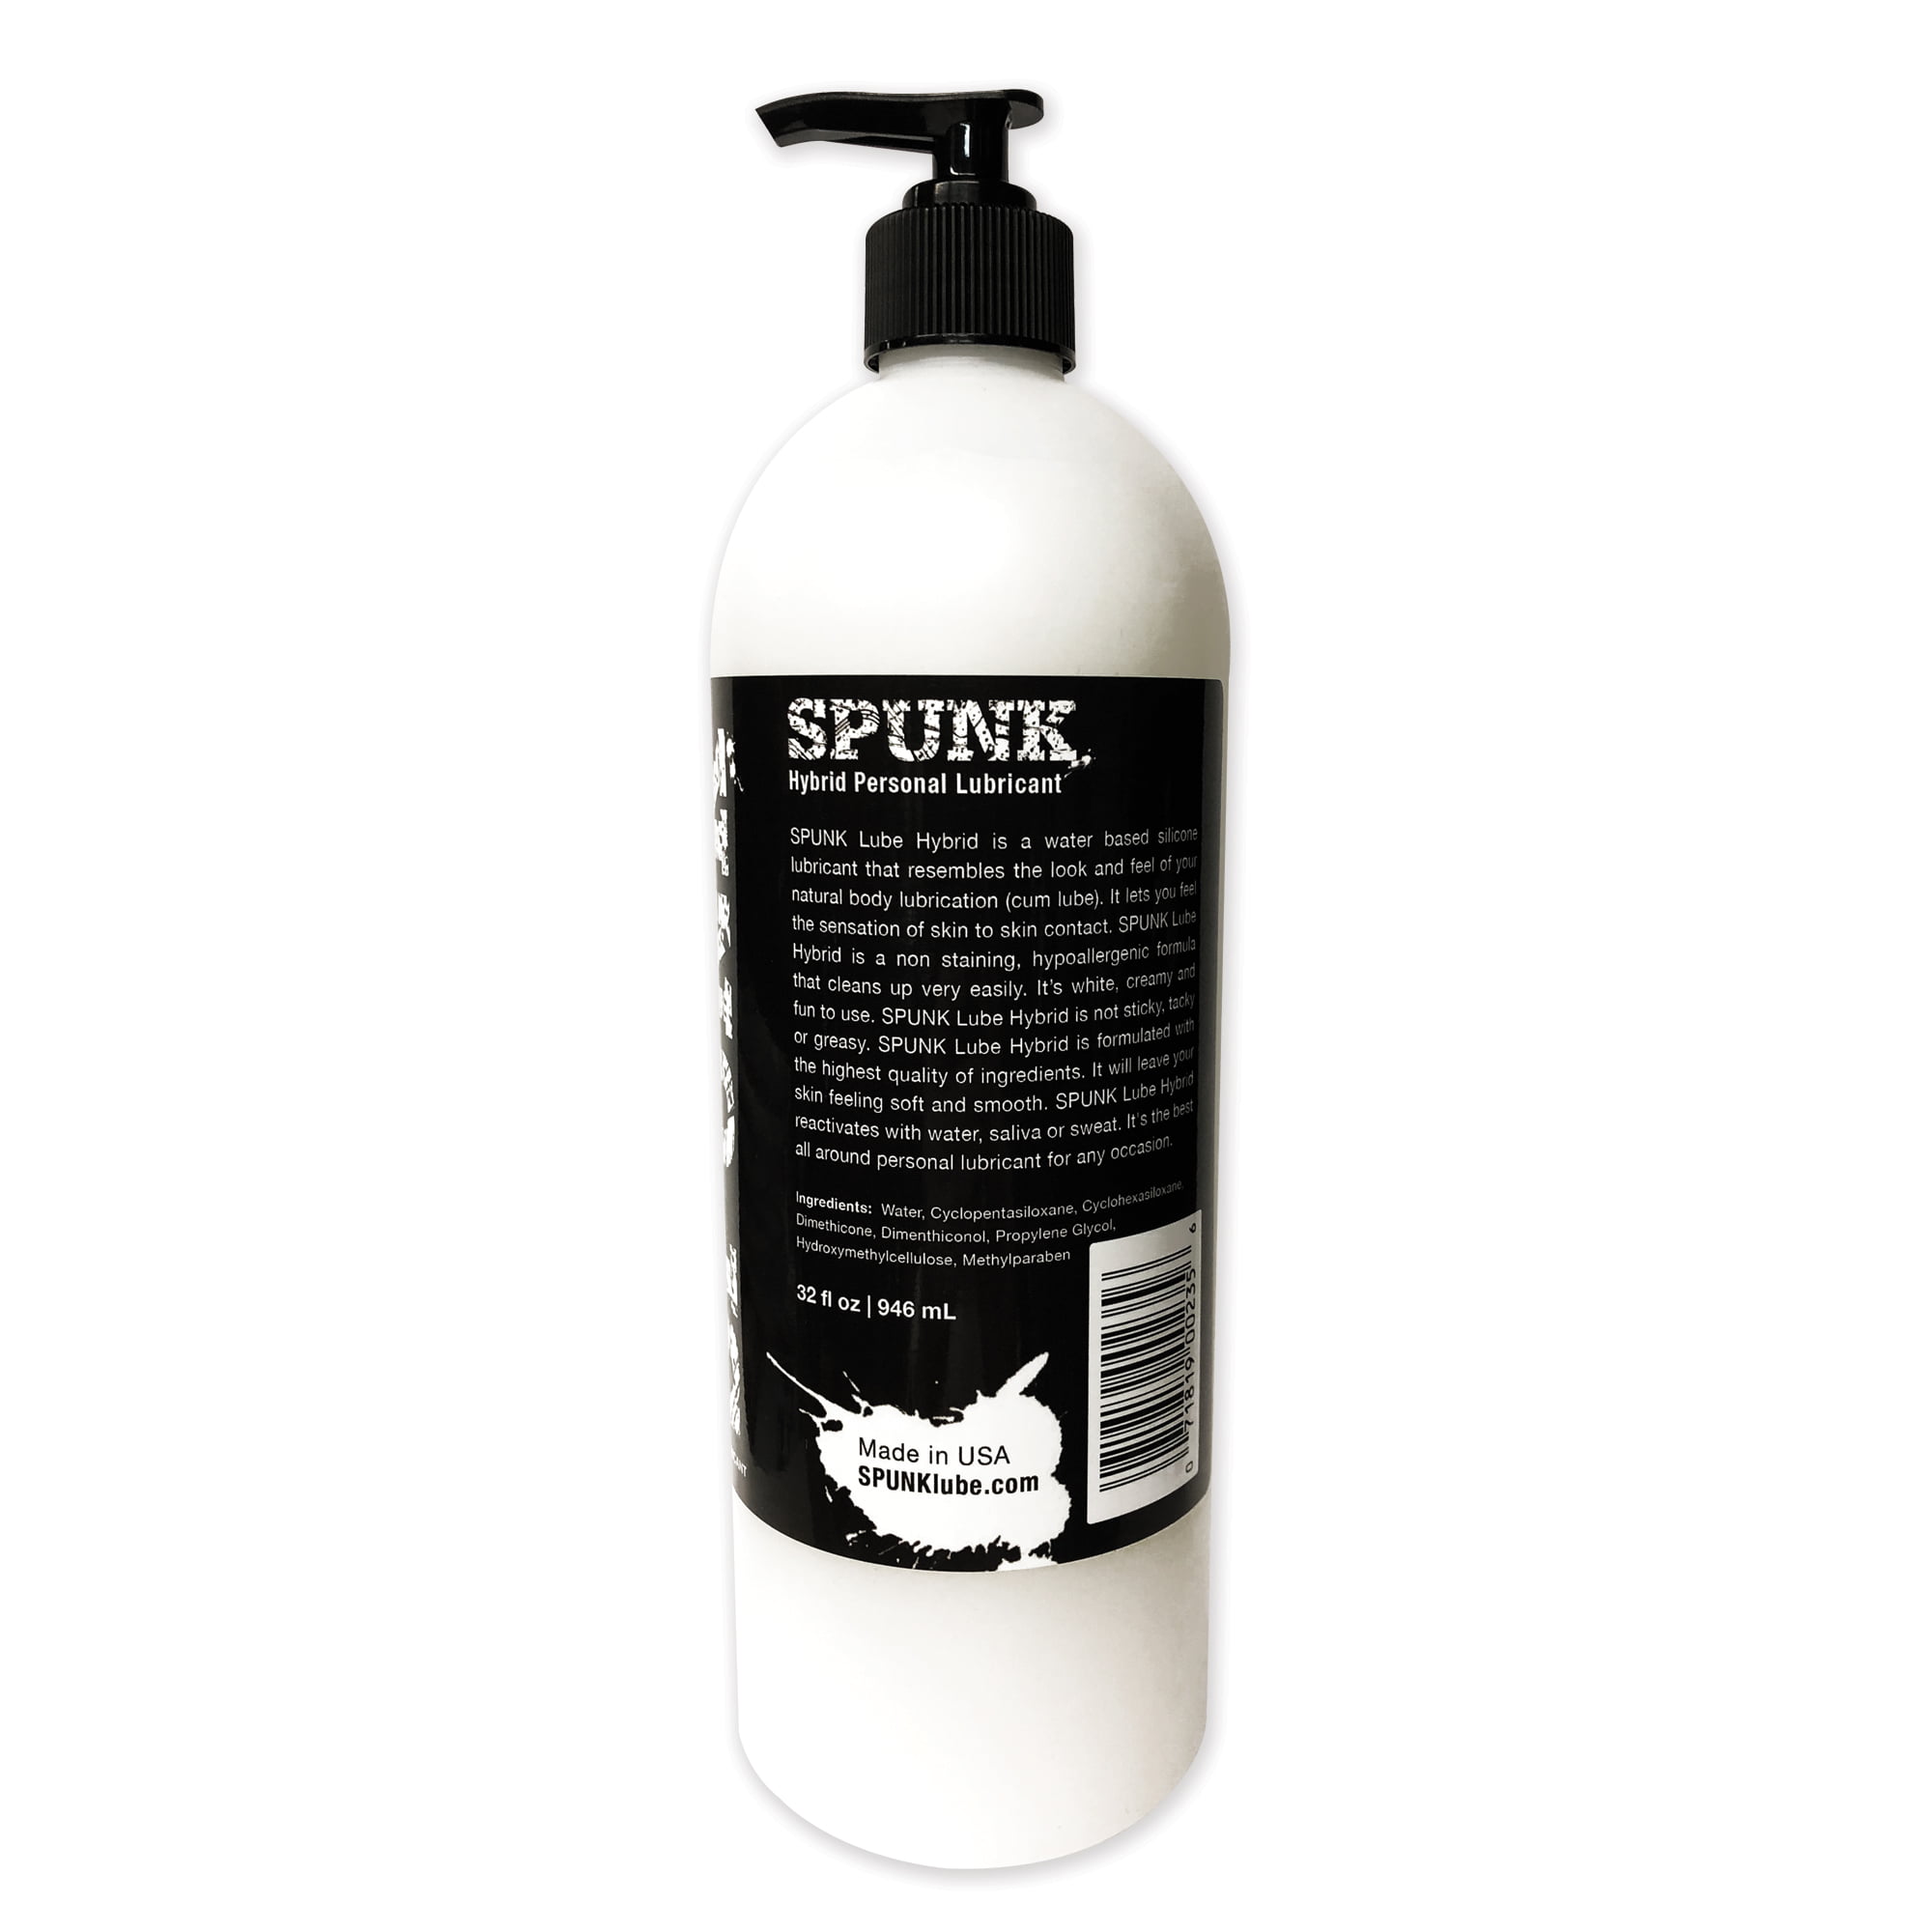 bruce lorio recommends spunk in a bottle pic